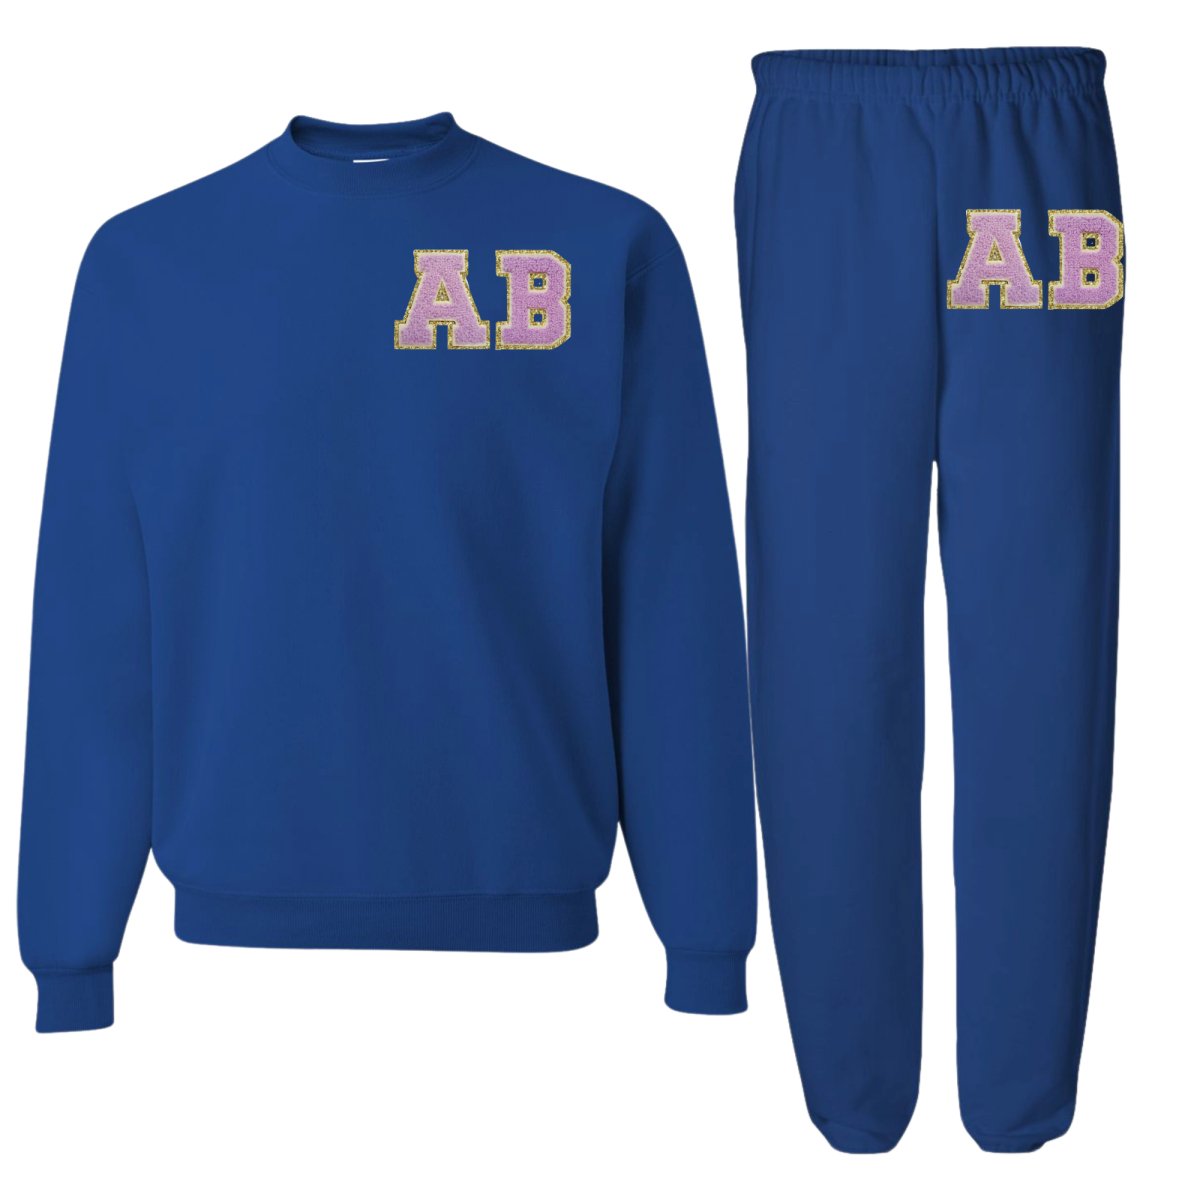 Second Edition Initialed Letter Patch Sweat Set - United Monograms